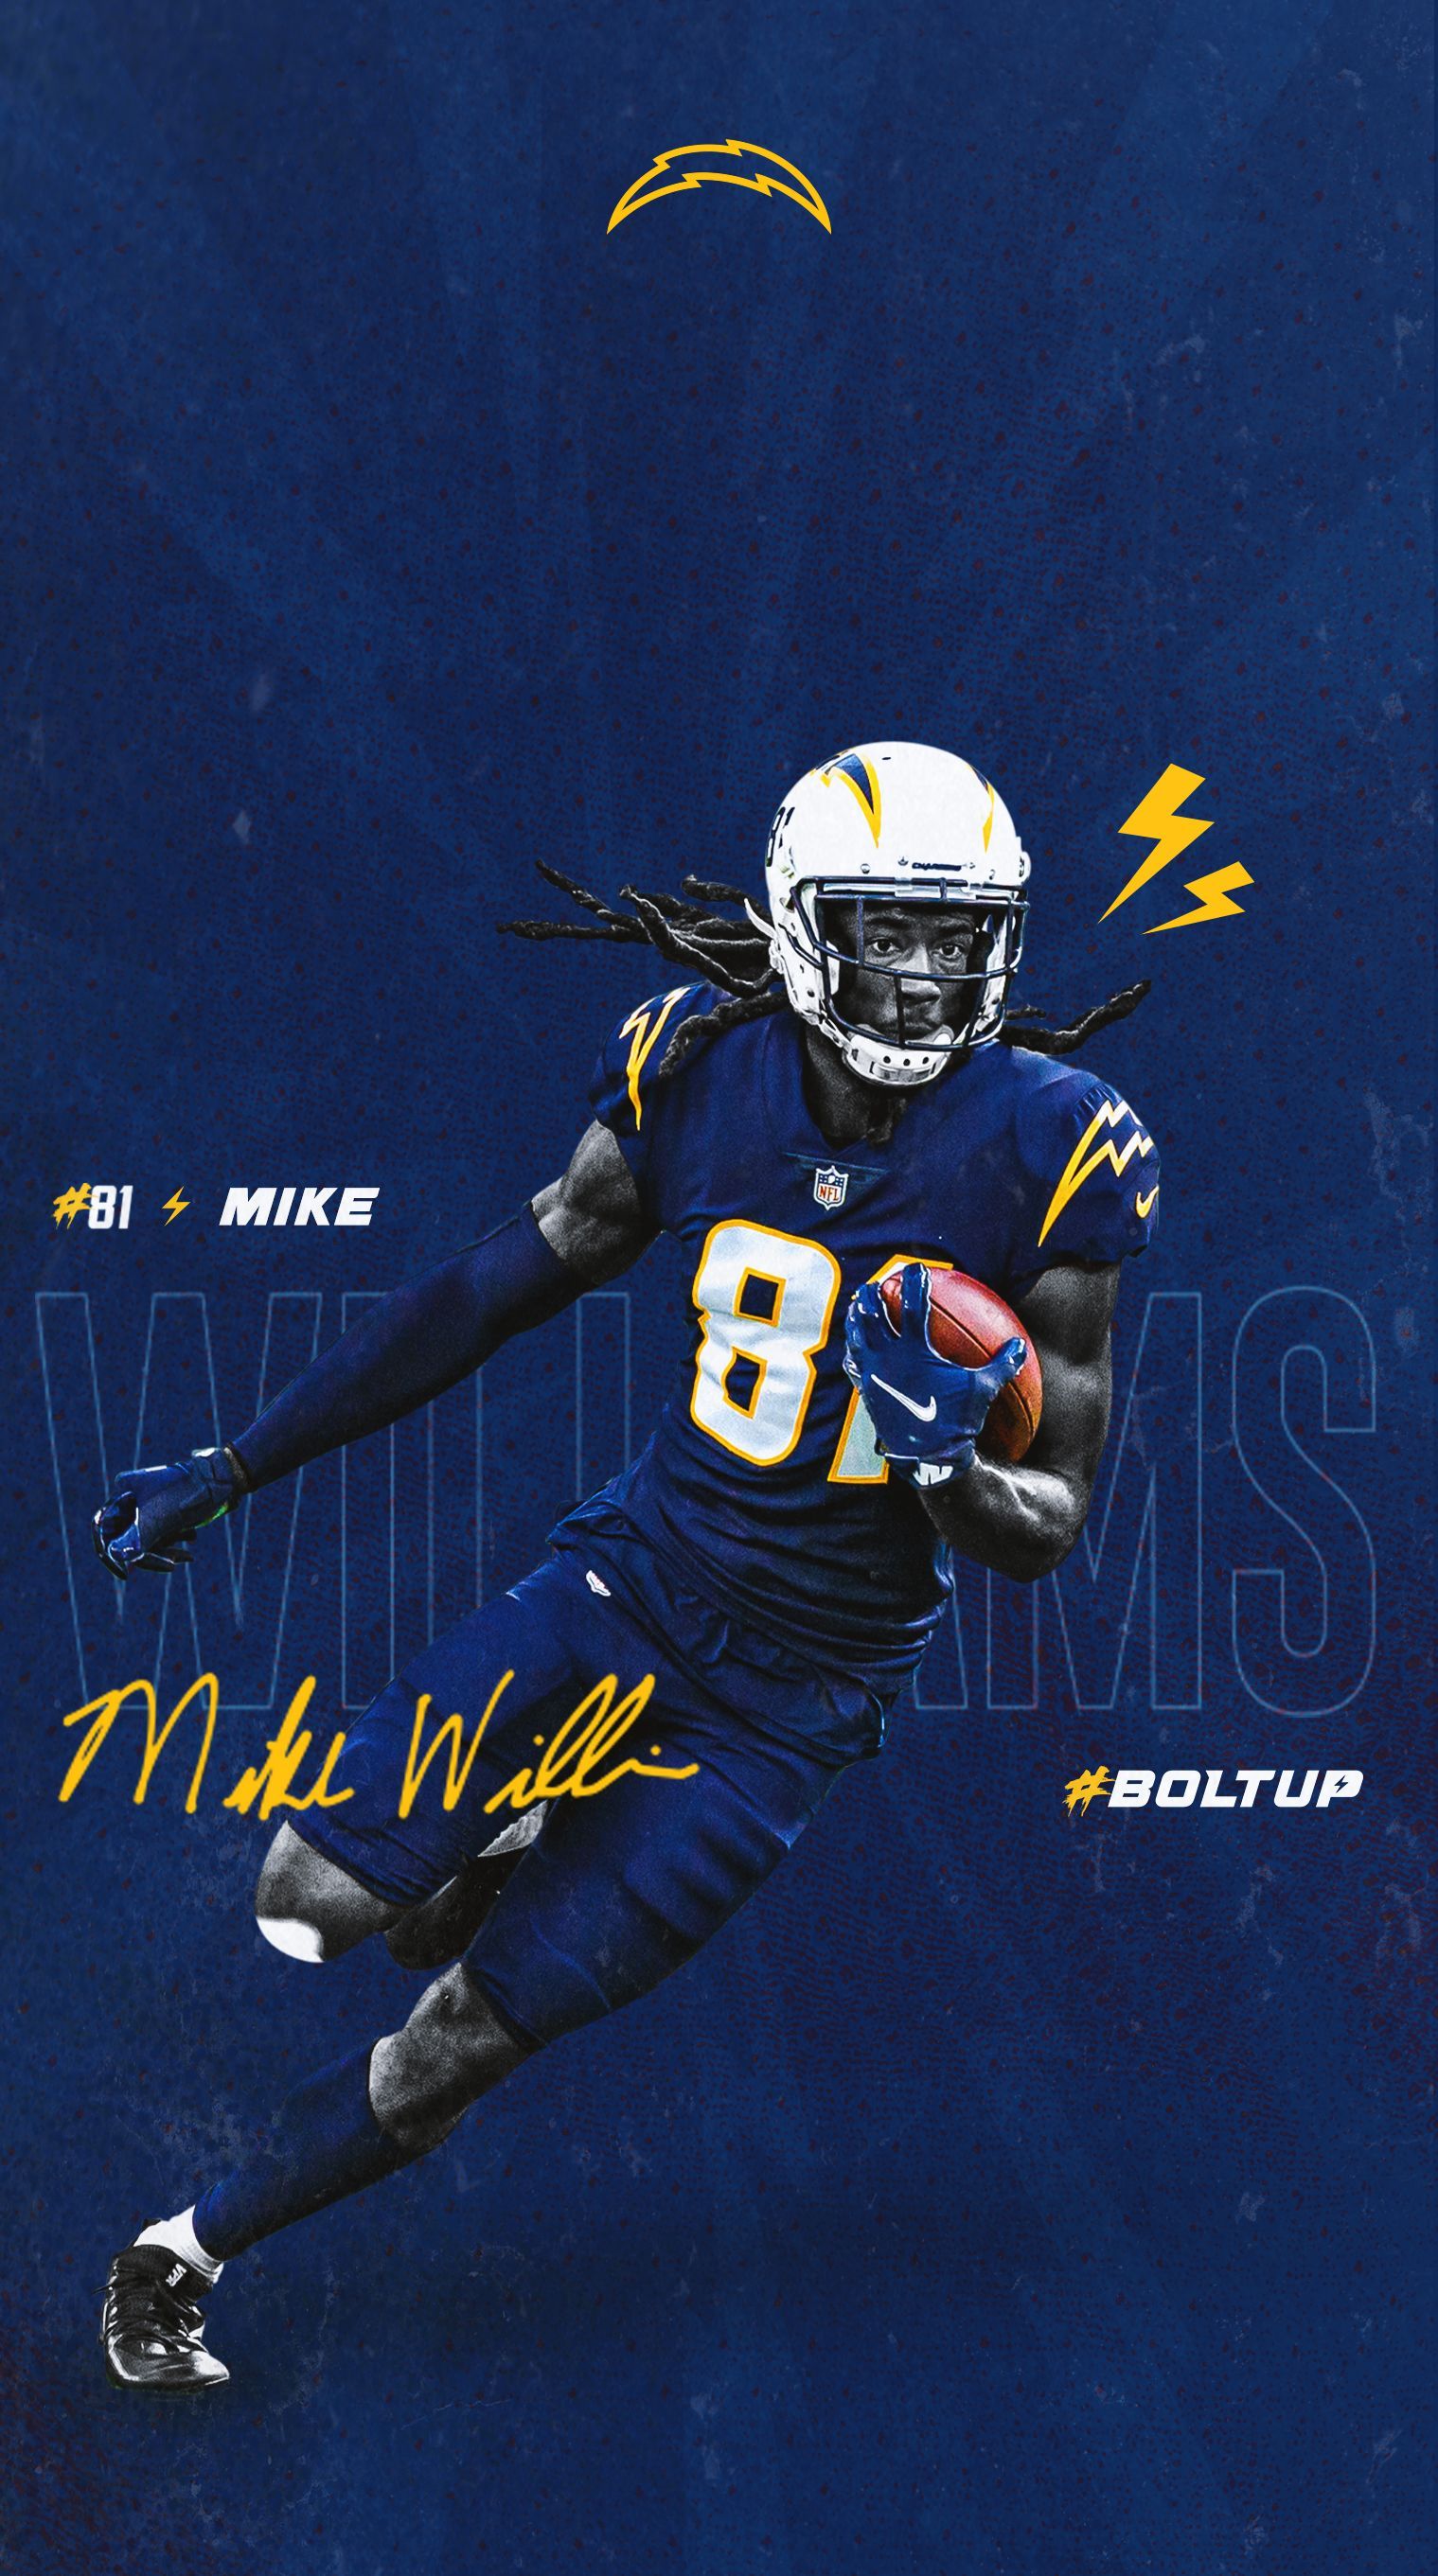 Chargers Wallpaper. Los Angeles Chargers